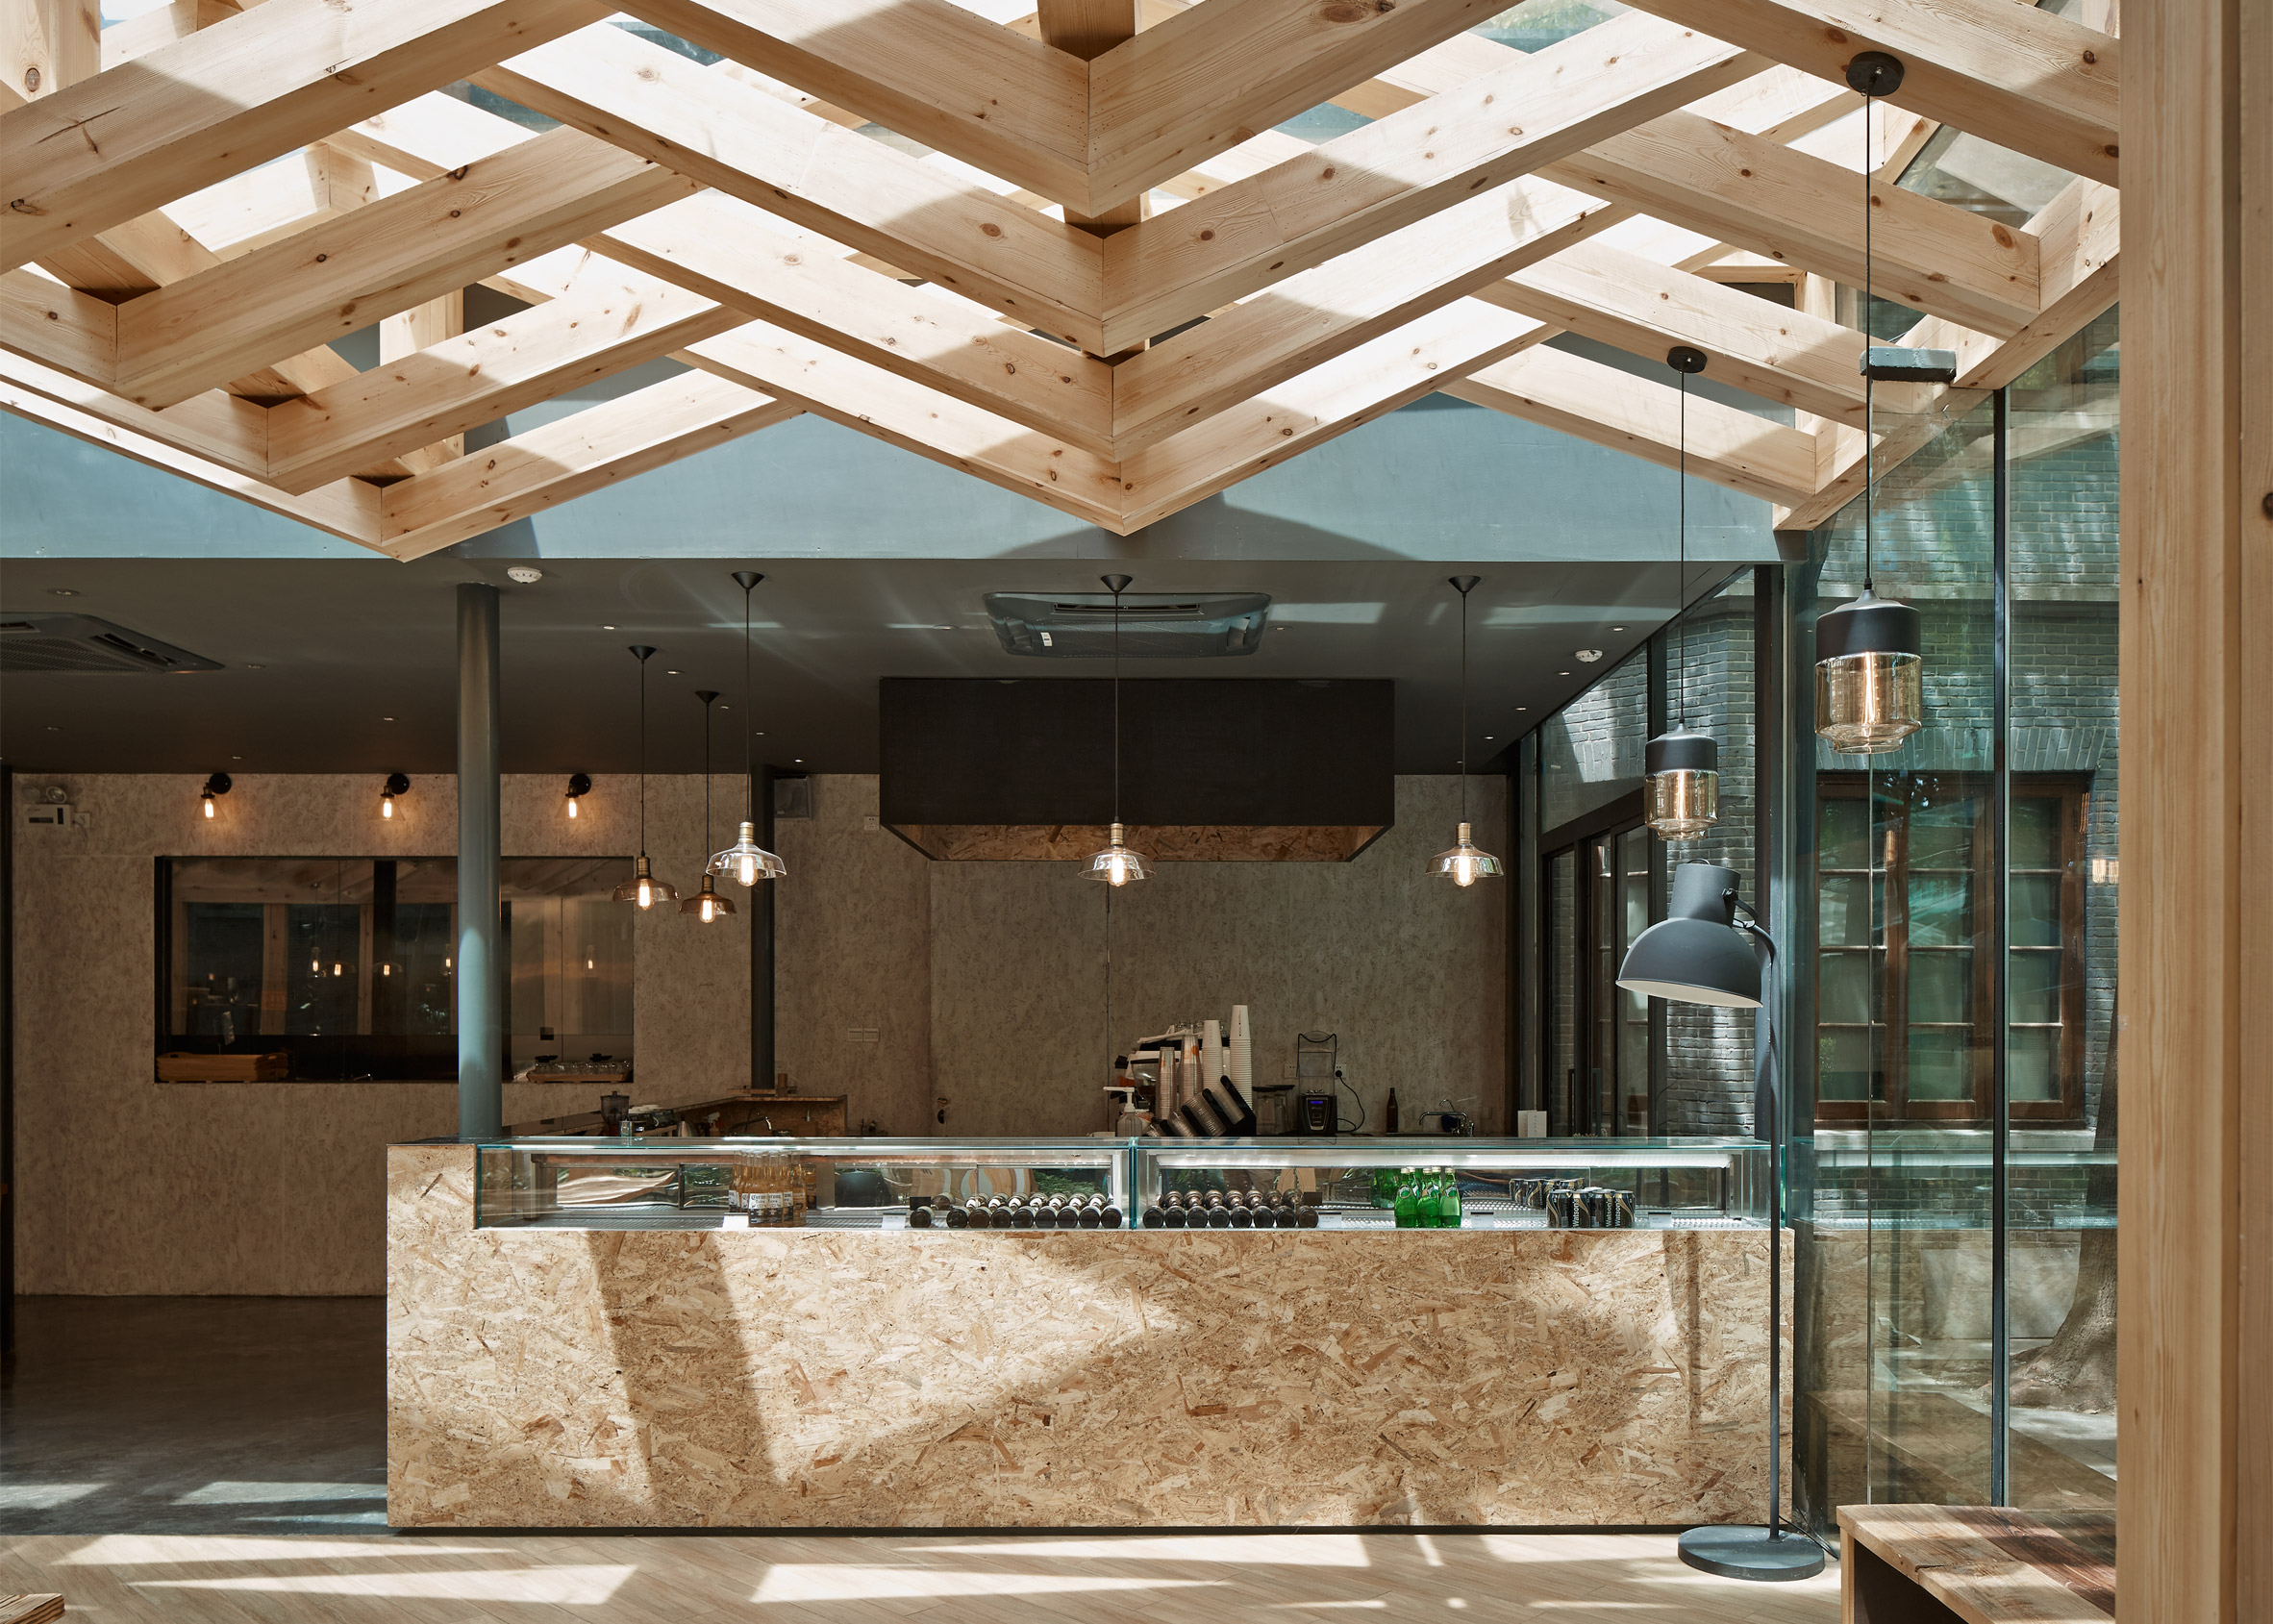 Kooo Architects Adds Wooden Lattice Ceiling To Cafe In China